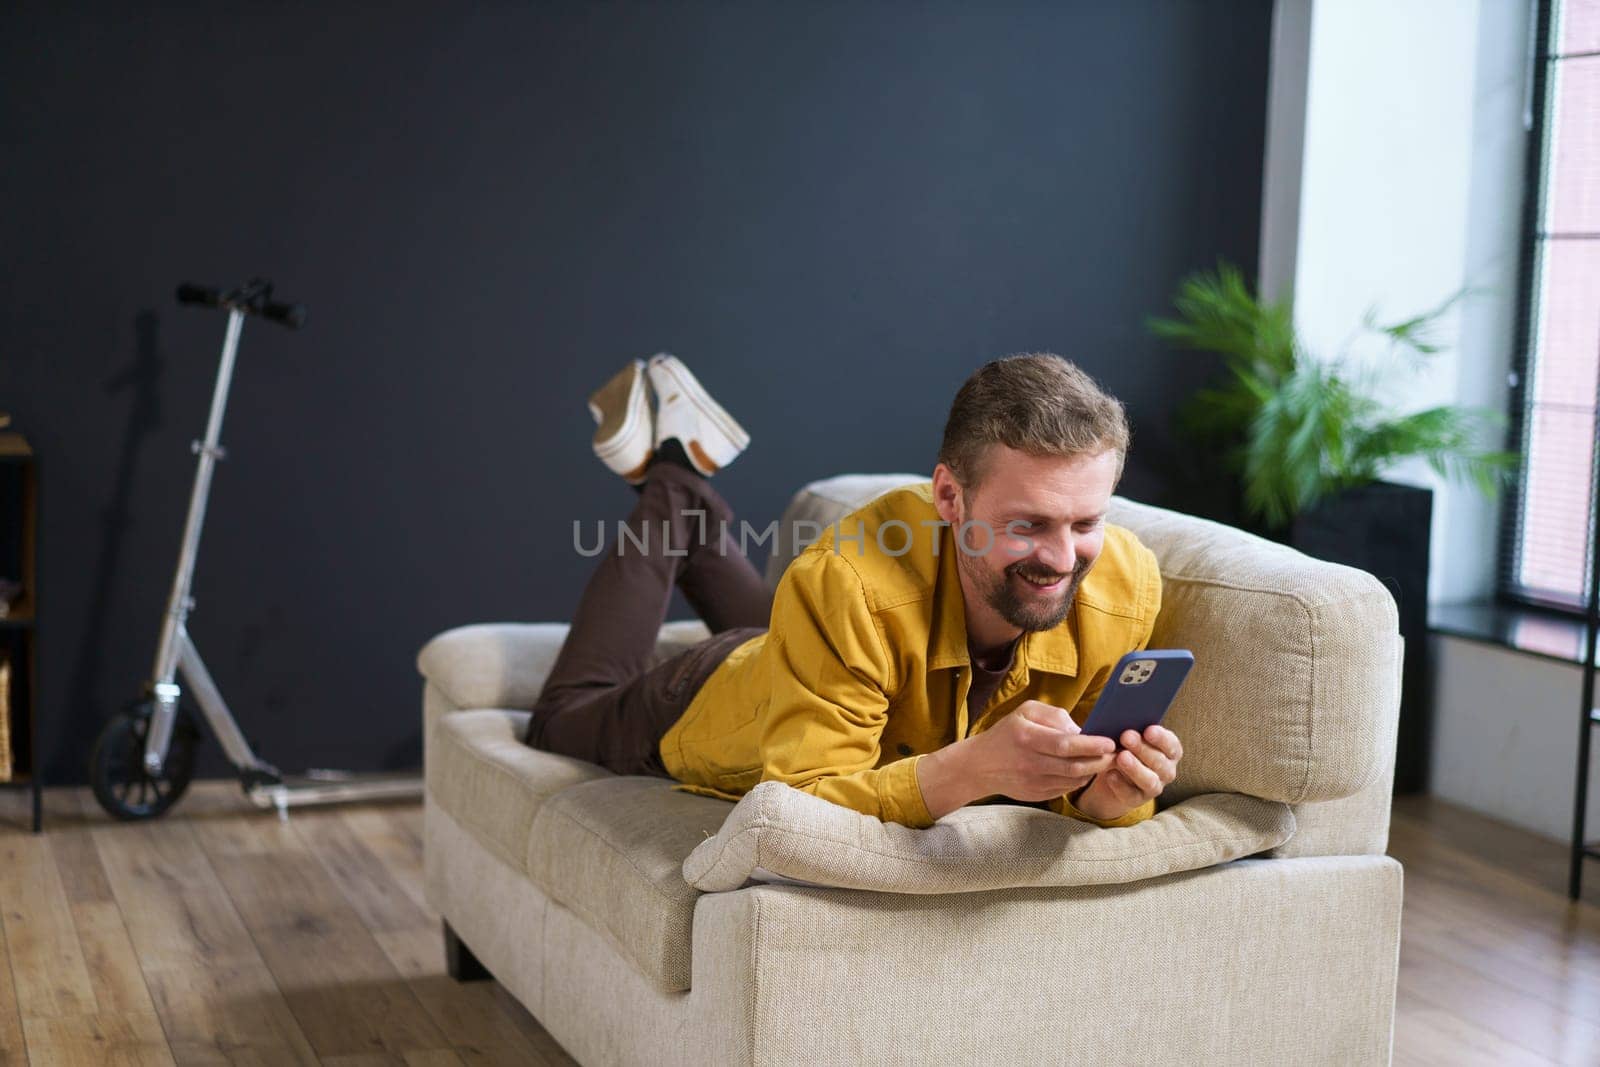 Smiling man enjoying time at home, sitting on sofa with phone. He appears handsome and content engages in texting or messaging on mobile device. High quality photo